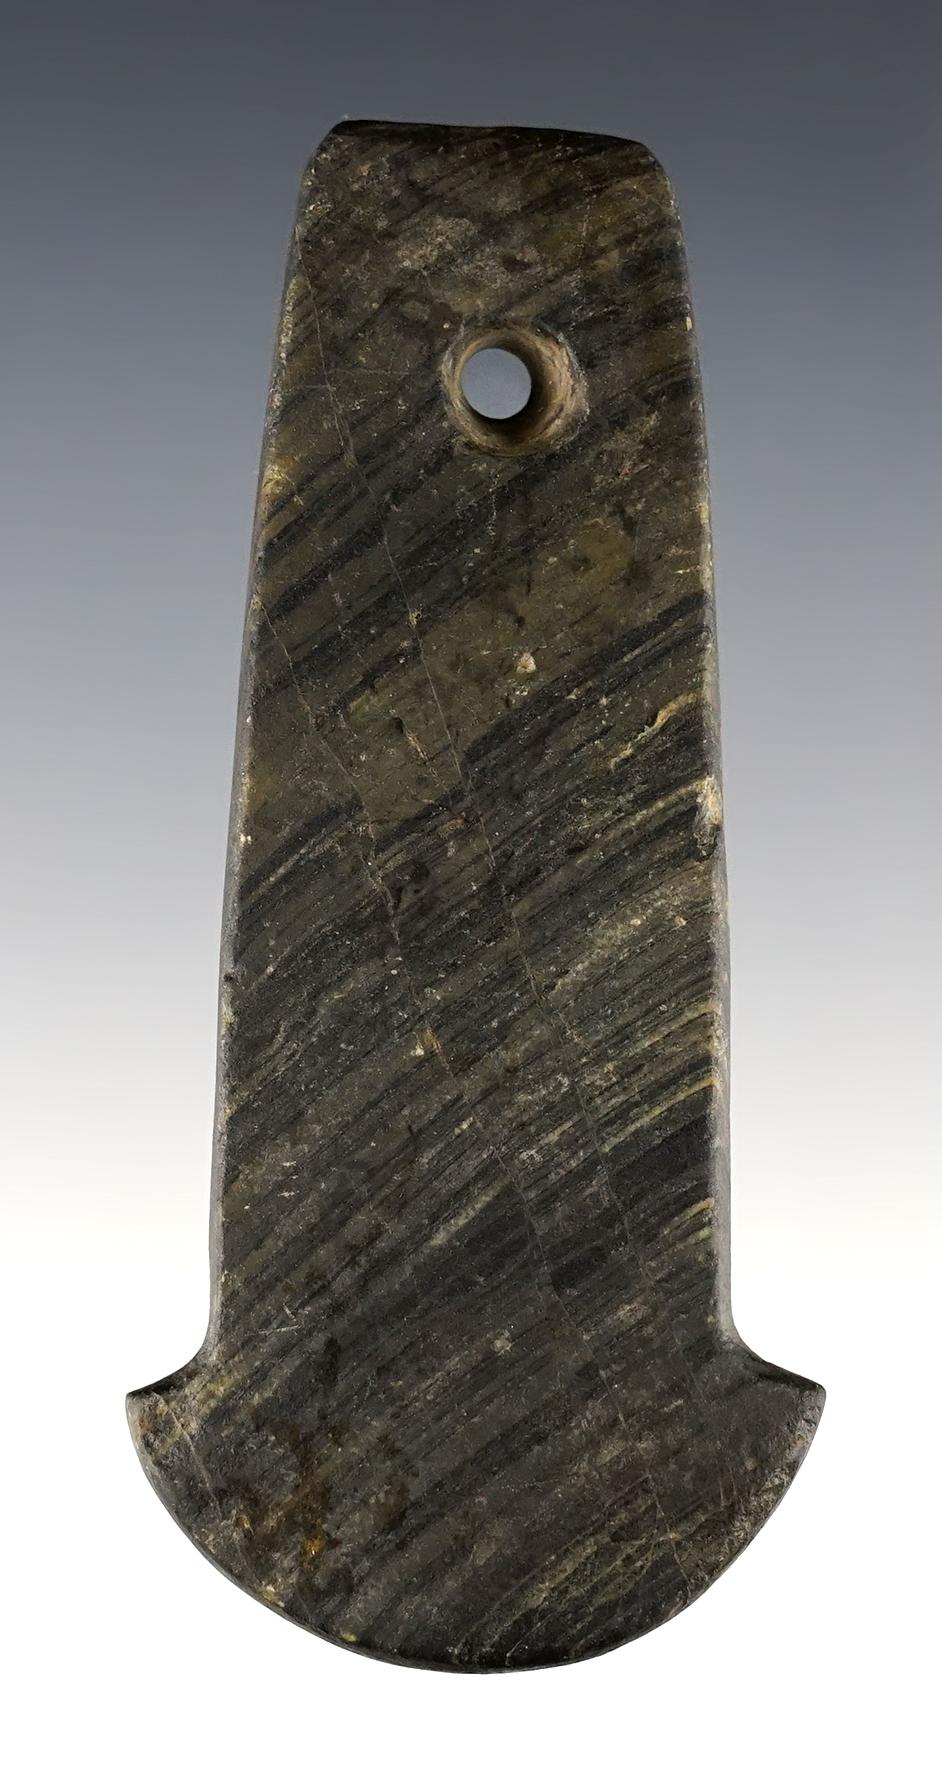 3 11/16" Slate Anchor Pendant made from well patinated Faulted Slate. Excellent condition.